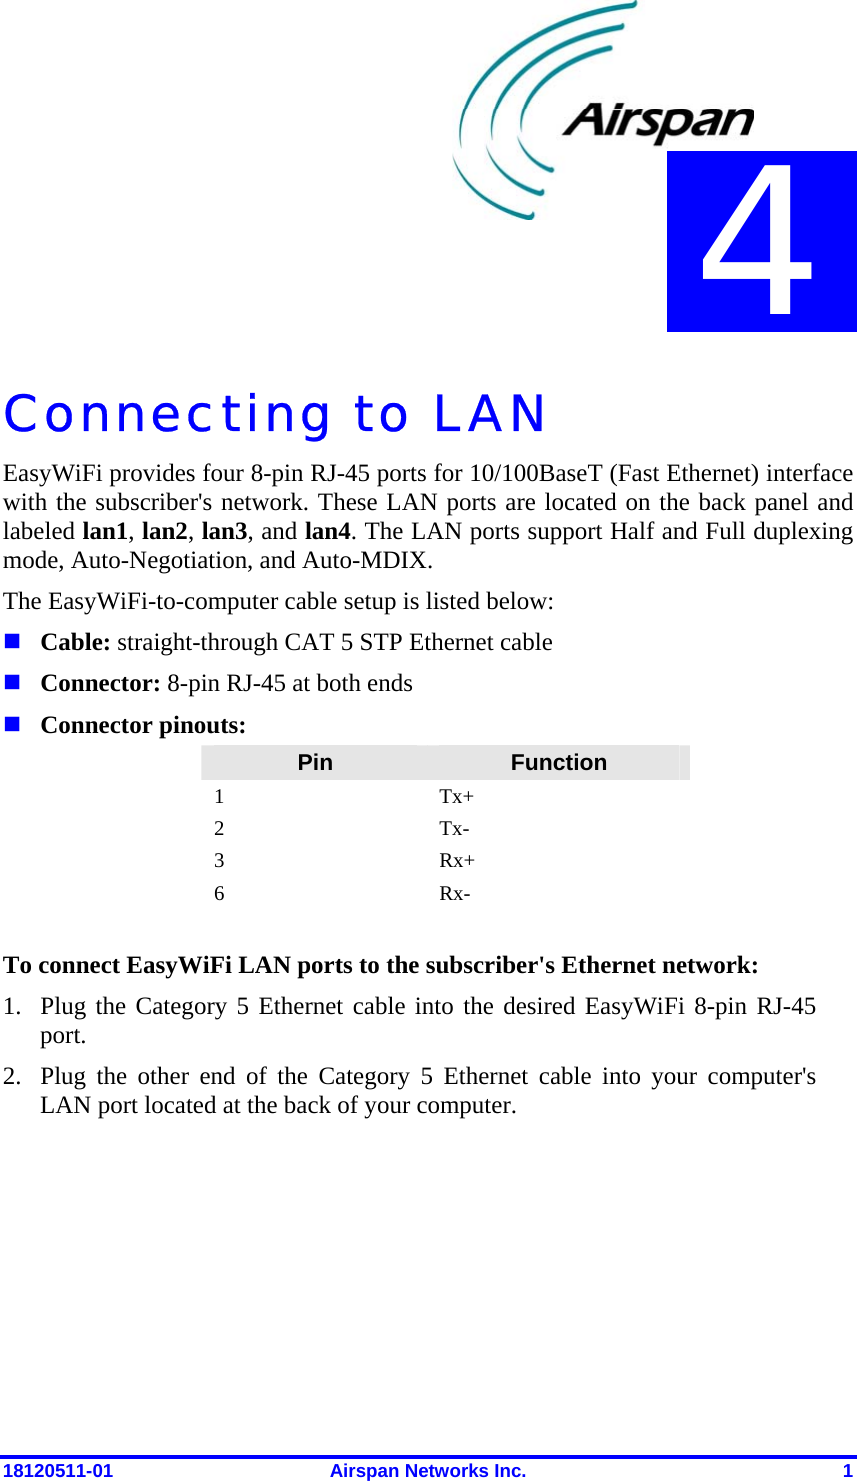  18120511-01  Airspan Networks Inc.  1 Connecting to LAN EasyWiFi provides four 8-pin RJ-45 ports for 10/100BaseT (Fast Ethernet) interface with the subscriber&apos;s network. These LAN ports are located on the back panel and labeled lan1, lan2, lan3, and lan4. The LAN ports support Half and Full duplexing mode, Auto-Negotiation, and Auto-MDIX. The EasyWiFi-to-computer cable setup is listed below:  Cable: straight-through CAT 5 STP Ethernet cable  Connector: 8-pin RJ-45 at both ends  Connector pinouts: Pin  Function 1 Tx+ 2 Tx- 3 Rx+ 6 Rx-  To connect EasyWiFi LAN ports to the subscriber&apos;s Ethernet network: 1. Plug the Category 5 Ethernet cable into the desired EasyWiFi 8-pin RJ-45 port.  2. Plug the other end of the Category 5 Ethernet cable into your computer&apos;s LAN port located at the back of your computer. 4 